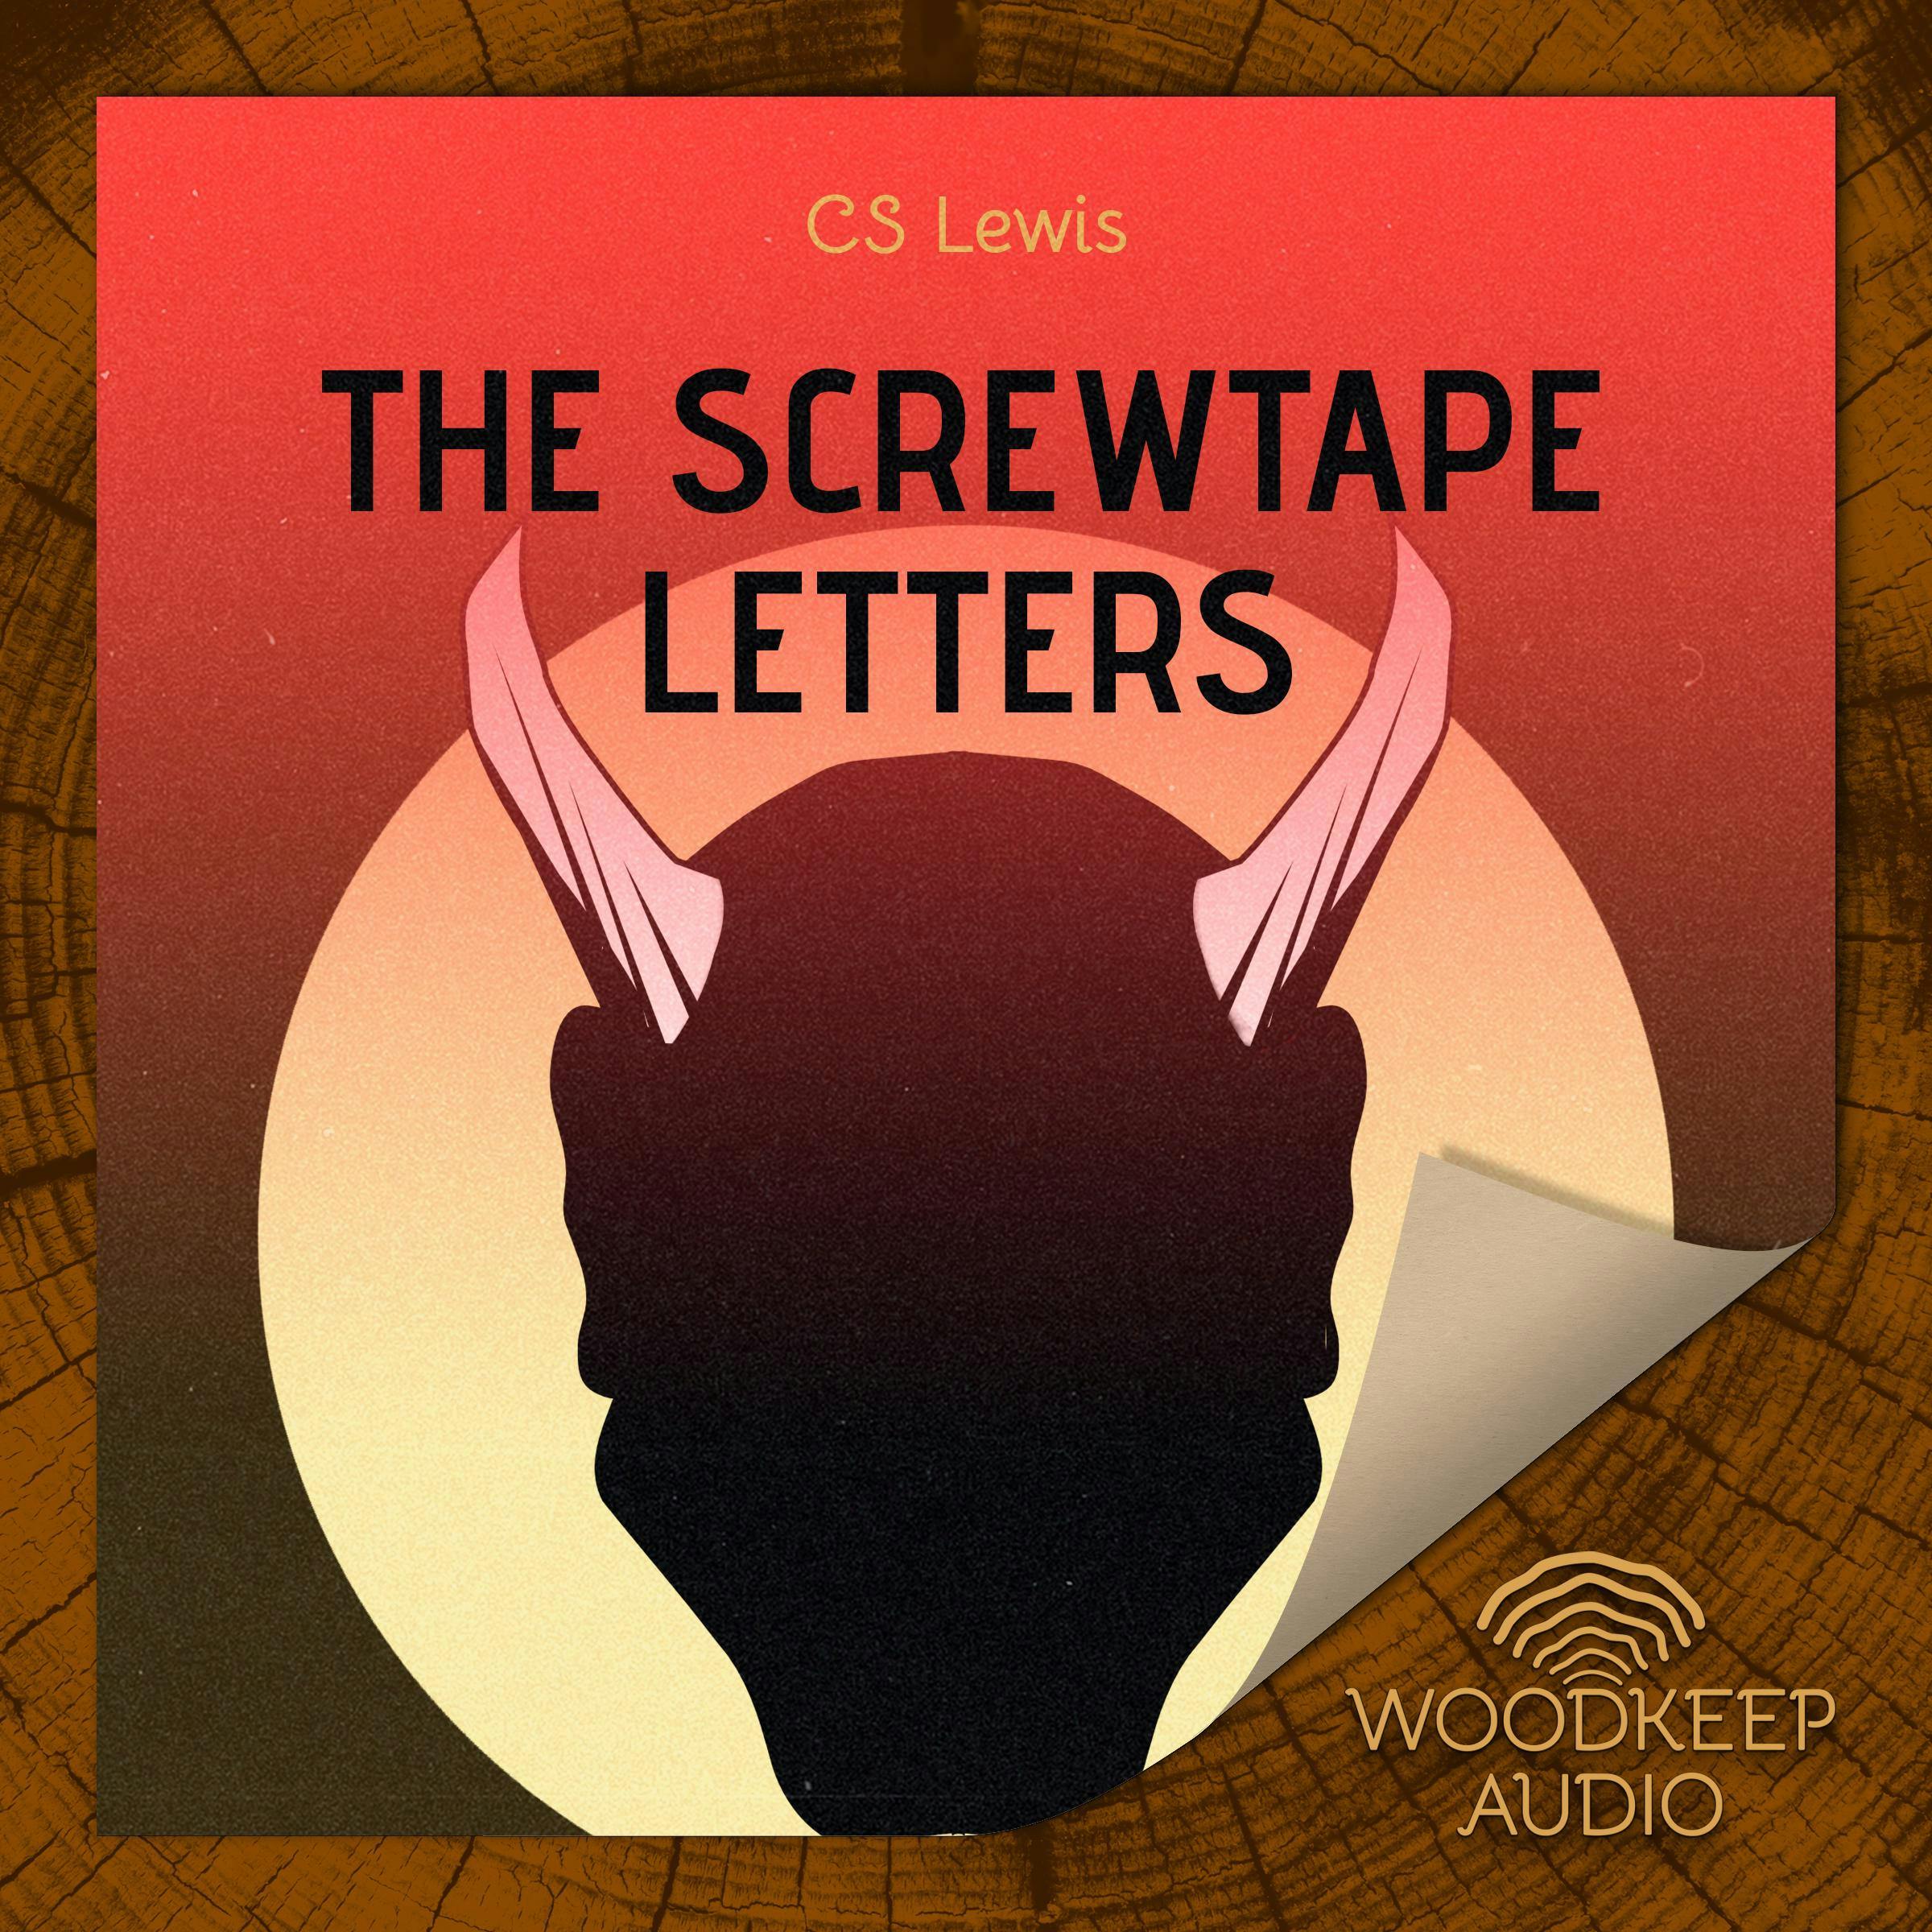 The Screwtape Letters - undefined